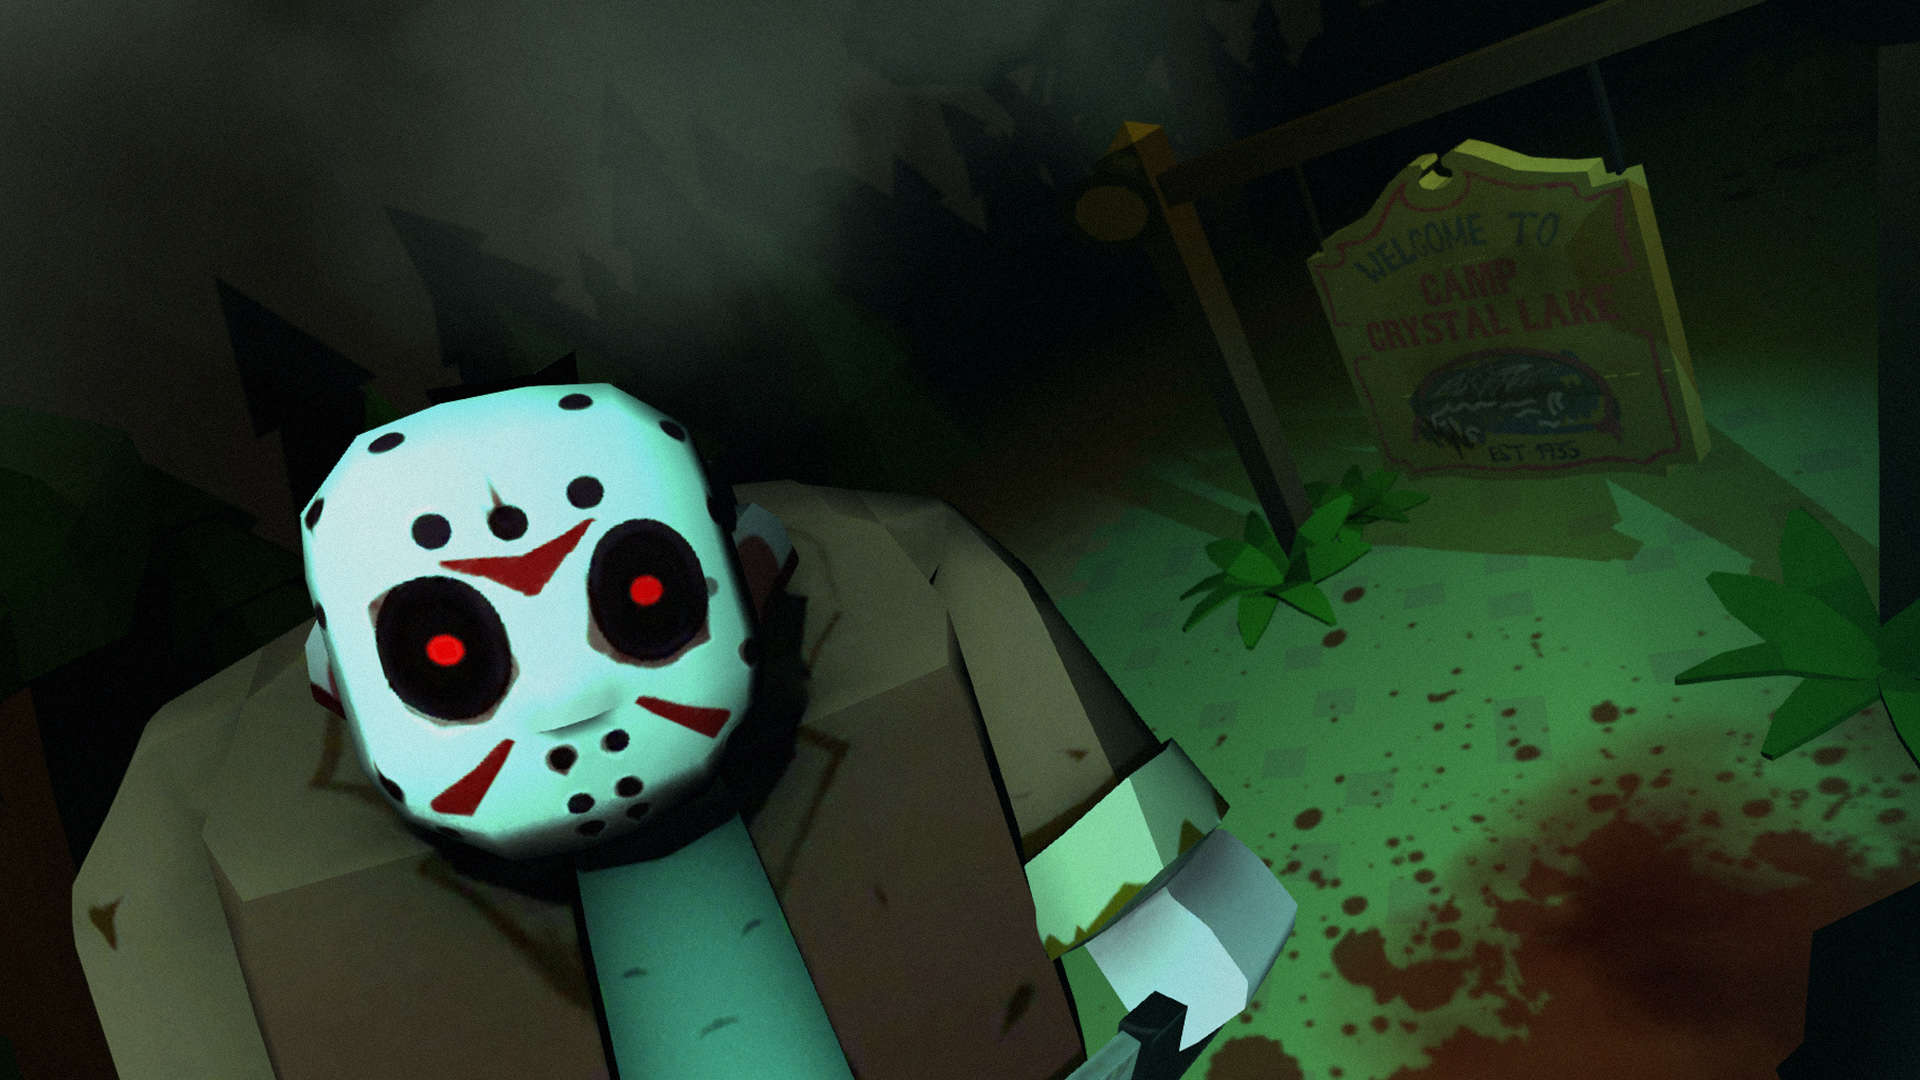 Friday the 13th: Killer Puzzle Review – Proven Gamer